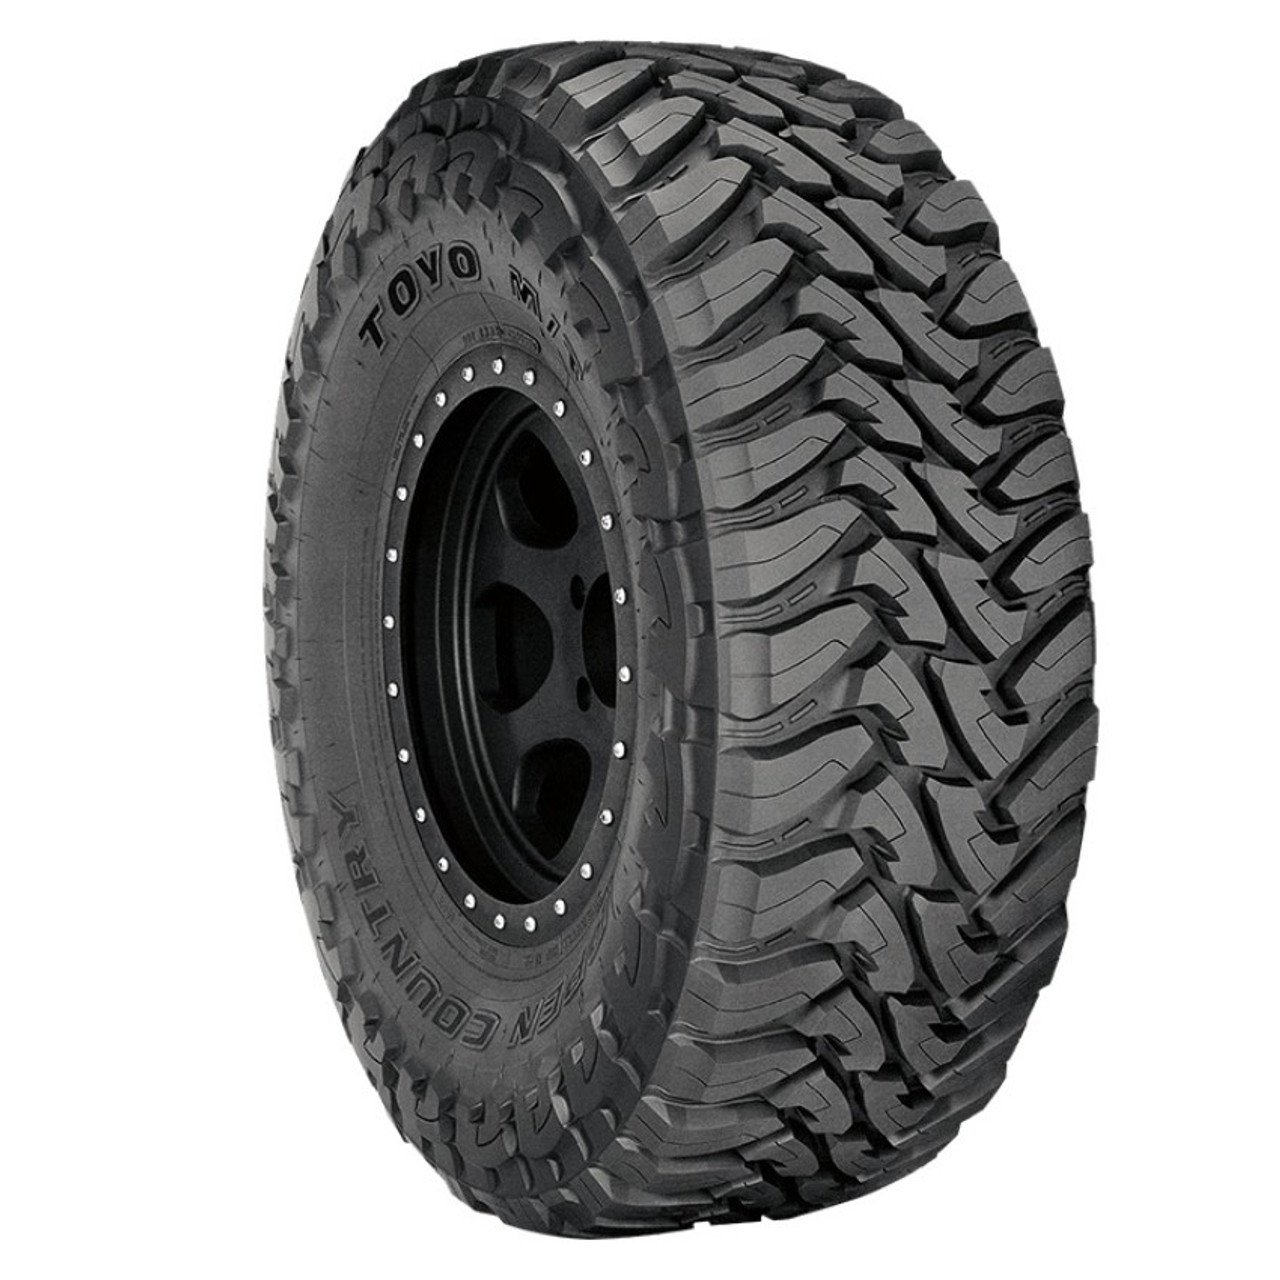 Toyo Open Country M/T Tire - 33X12.50R22LT 114Q F/12